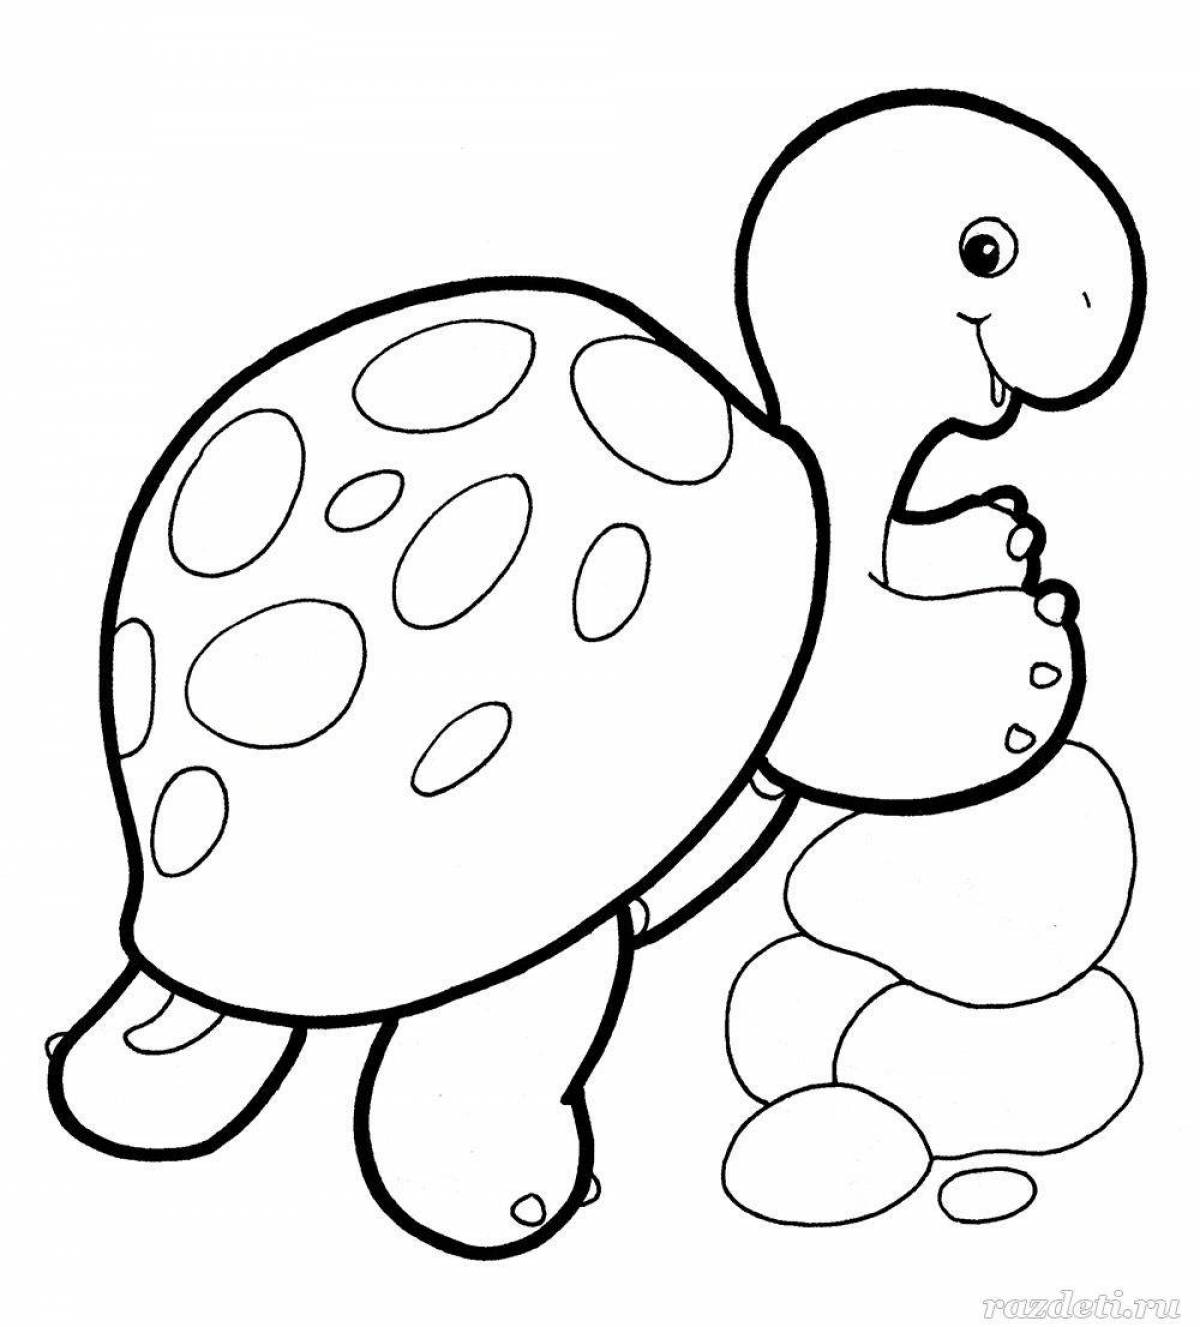 Cute turtle coloring book for kids